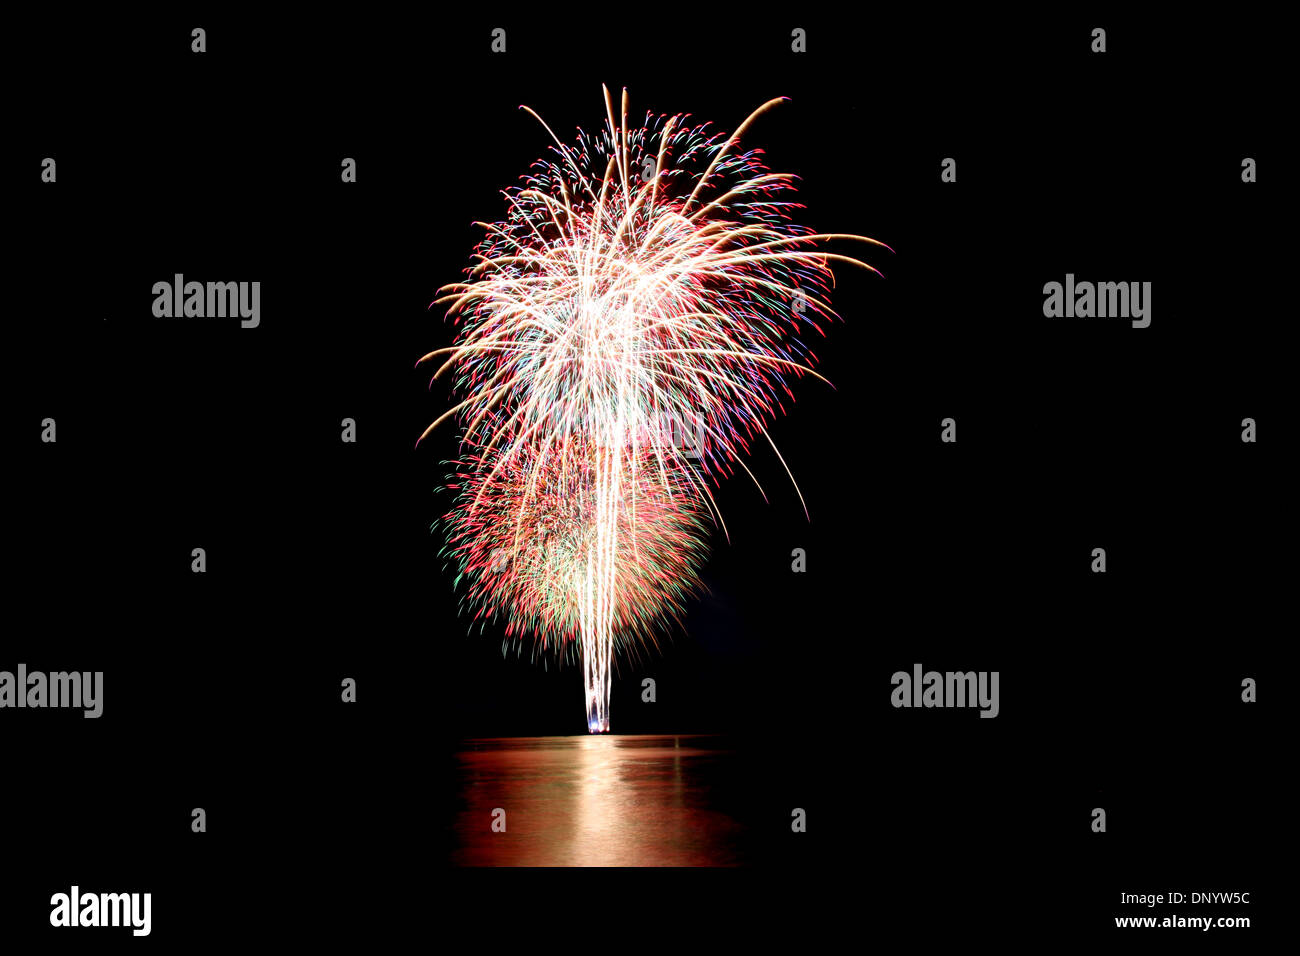 Variety of colors Fireworks or firecracker in the darkness. Stock Photo